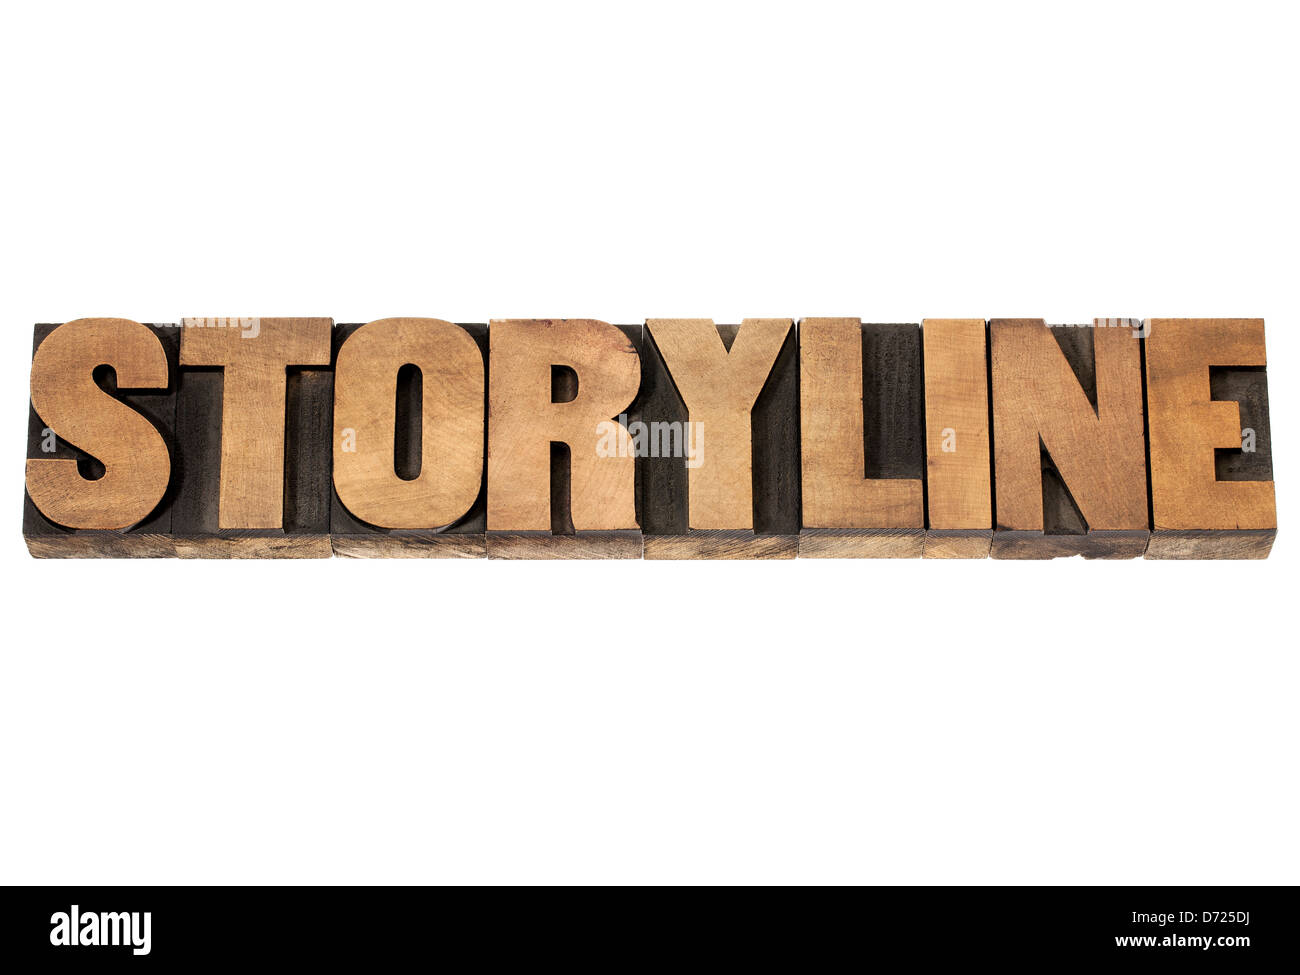 storyline word - narration or storytelling concept - isolated text in vintage letterpress wood type printing blocks Stock Photo